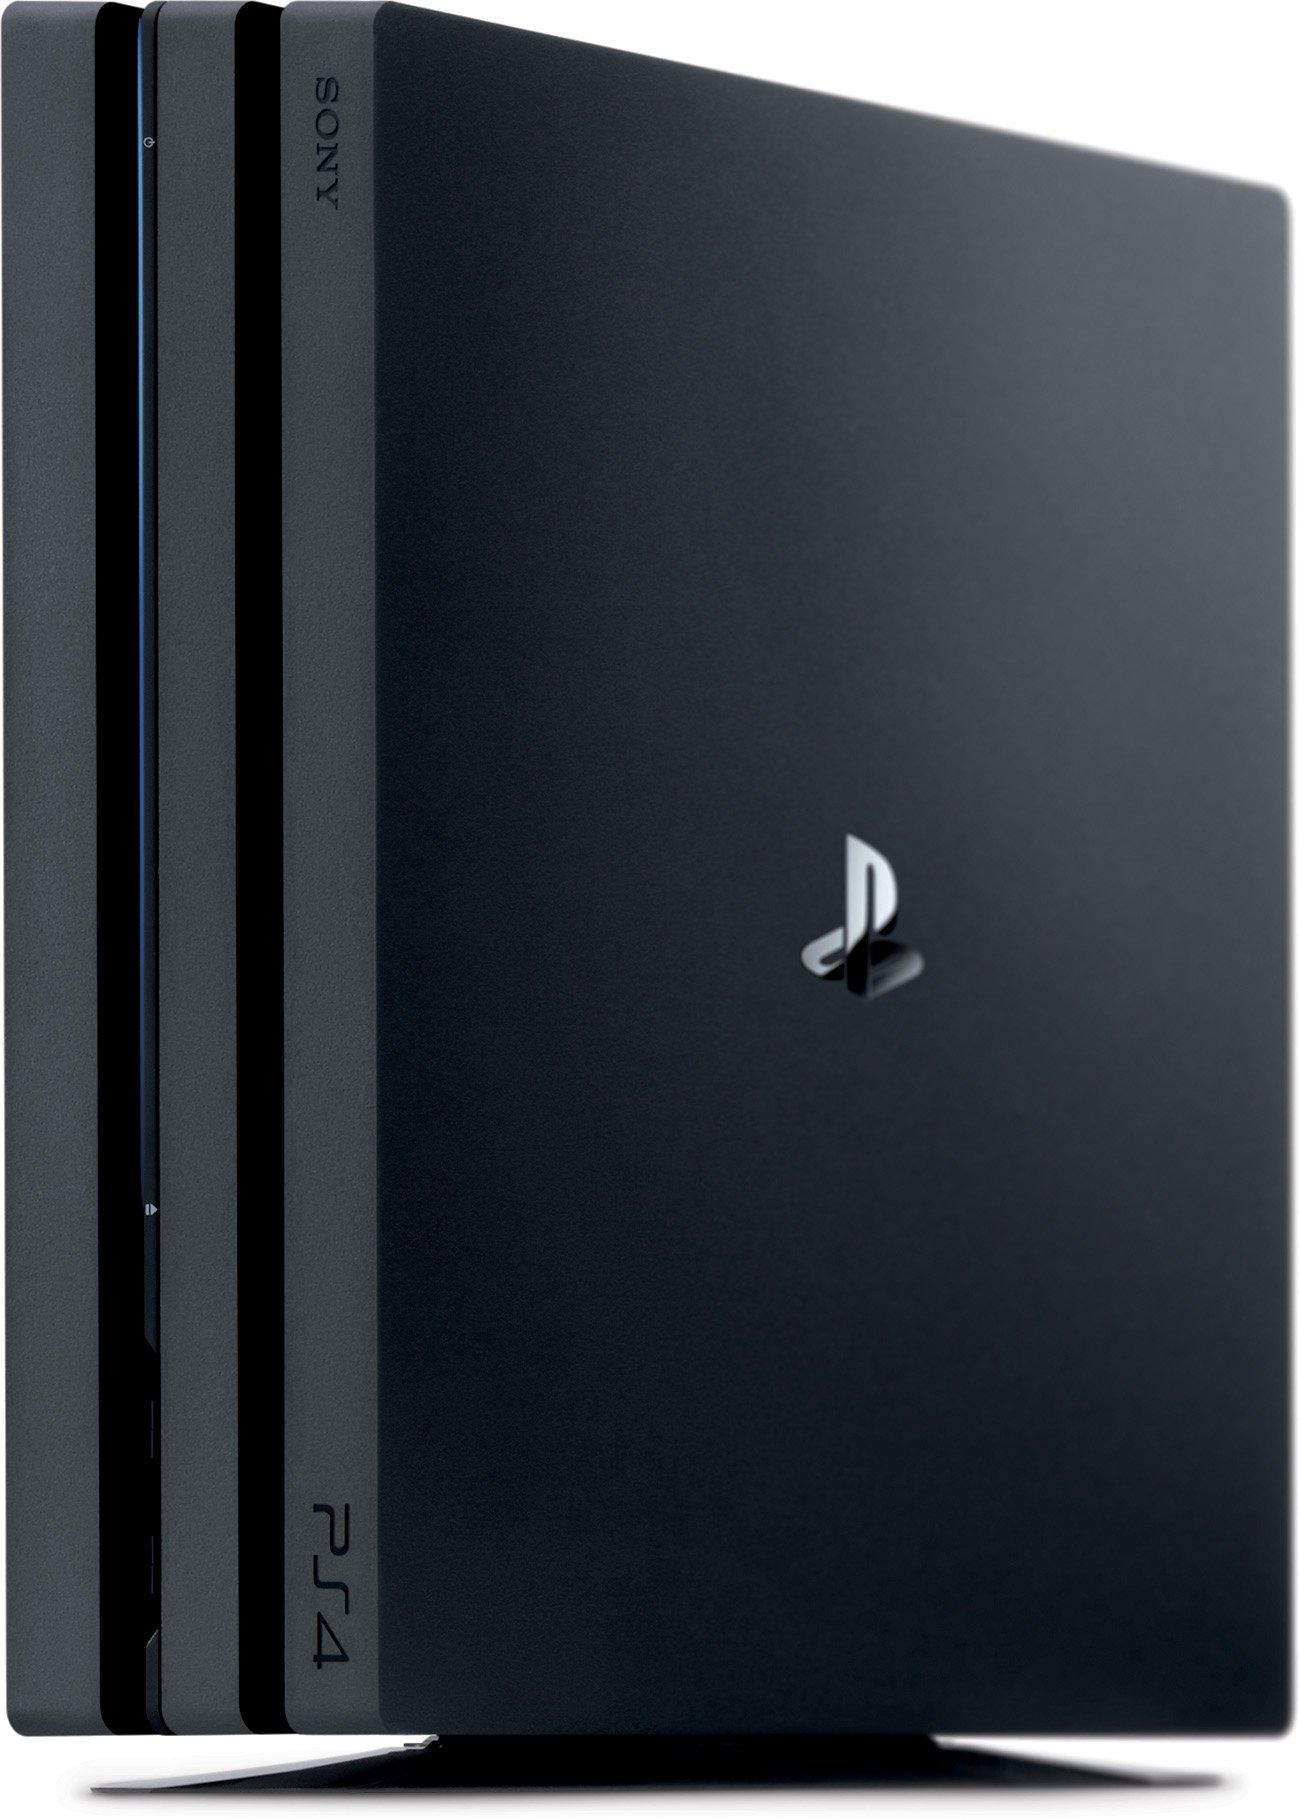 GameStop UK selling PlayStation 4 for £20 off RRP